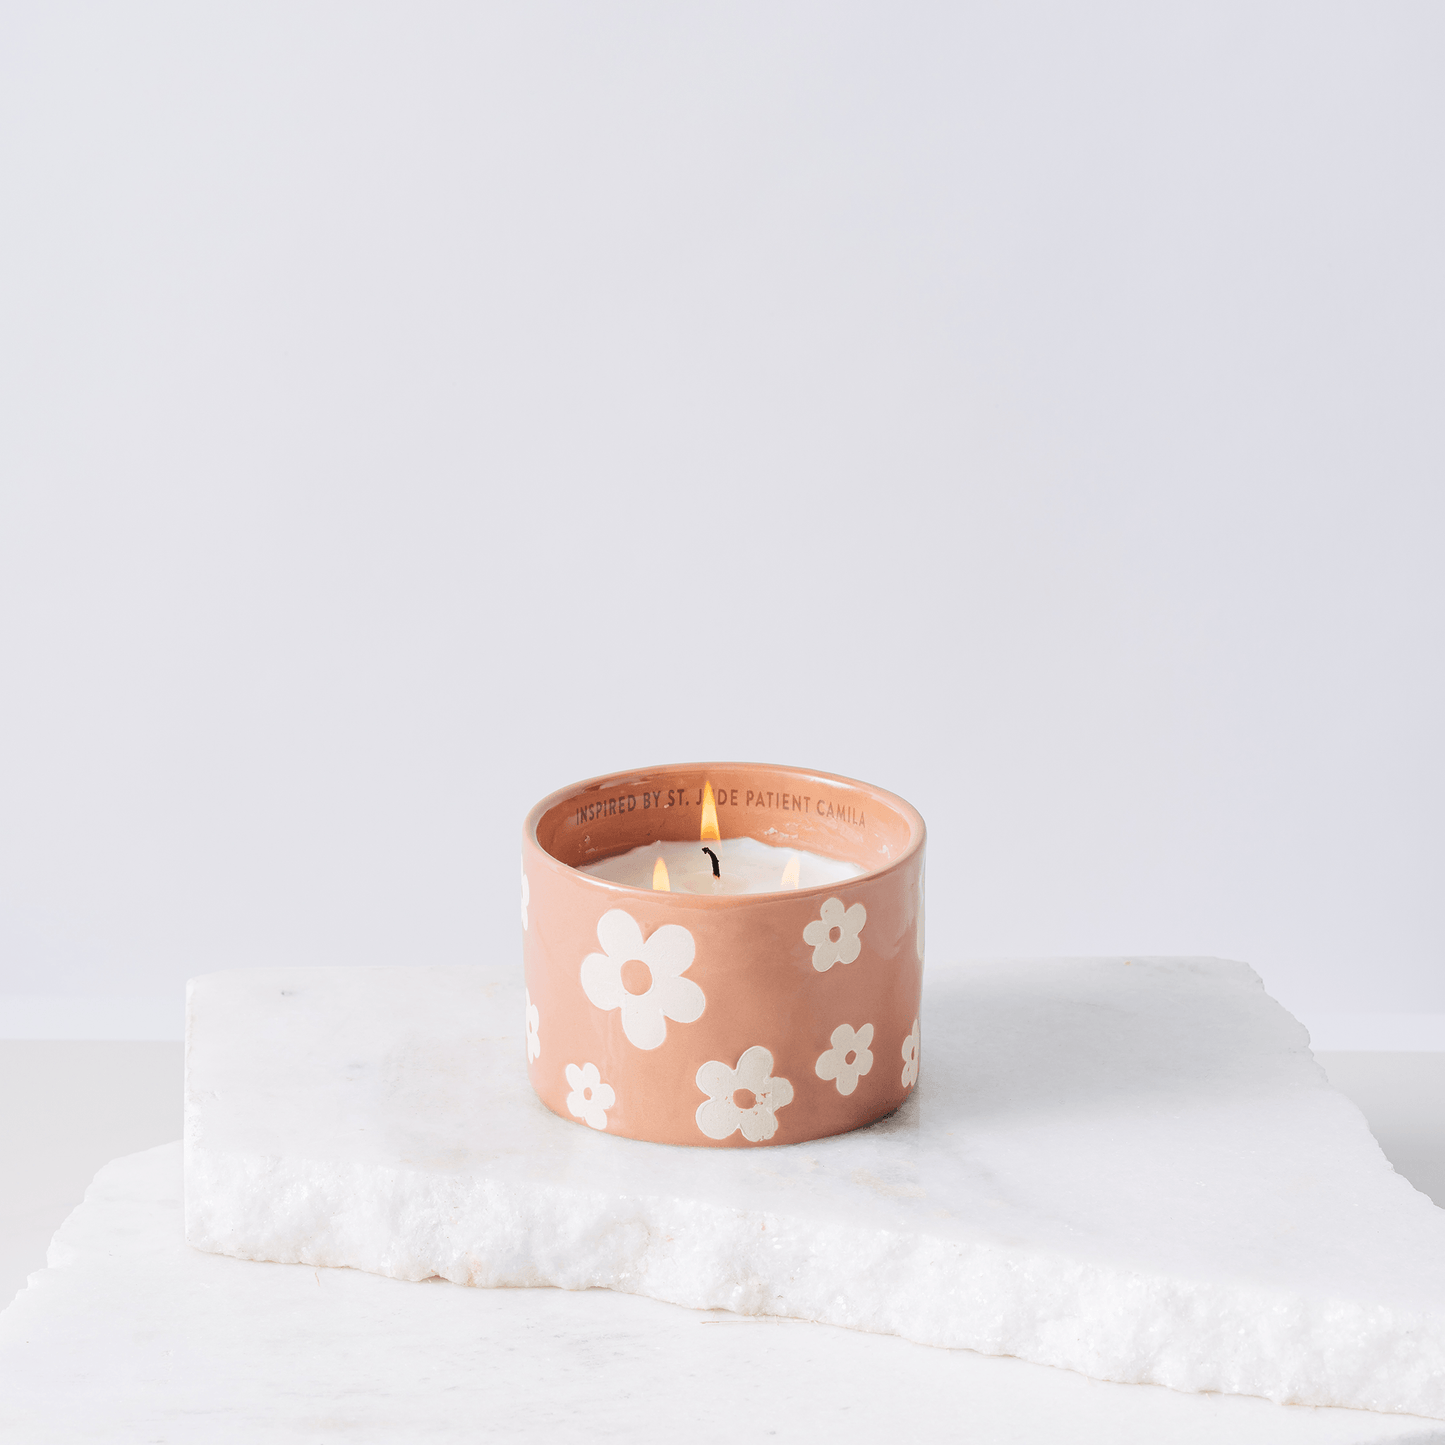 Pink ceramic candle with flowers and white soy wax center with three wicks burning 